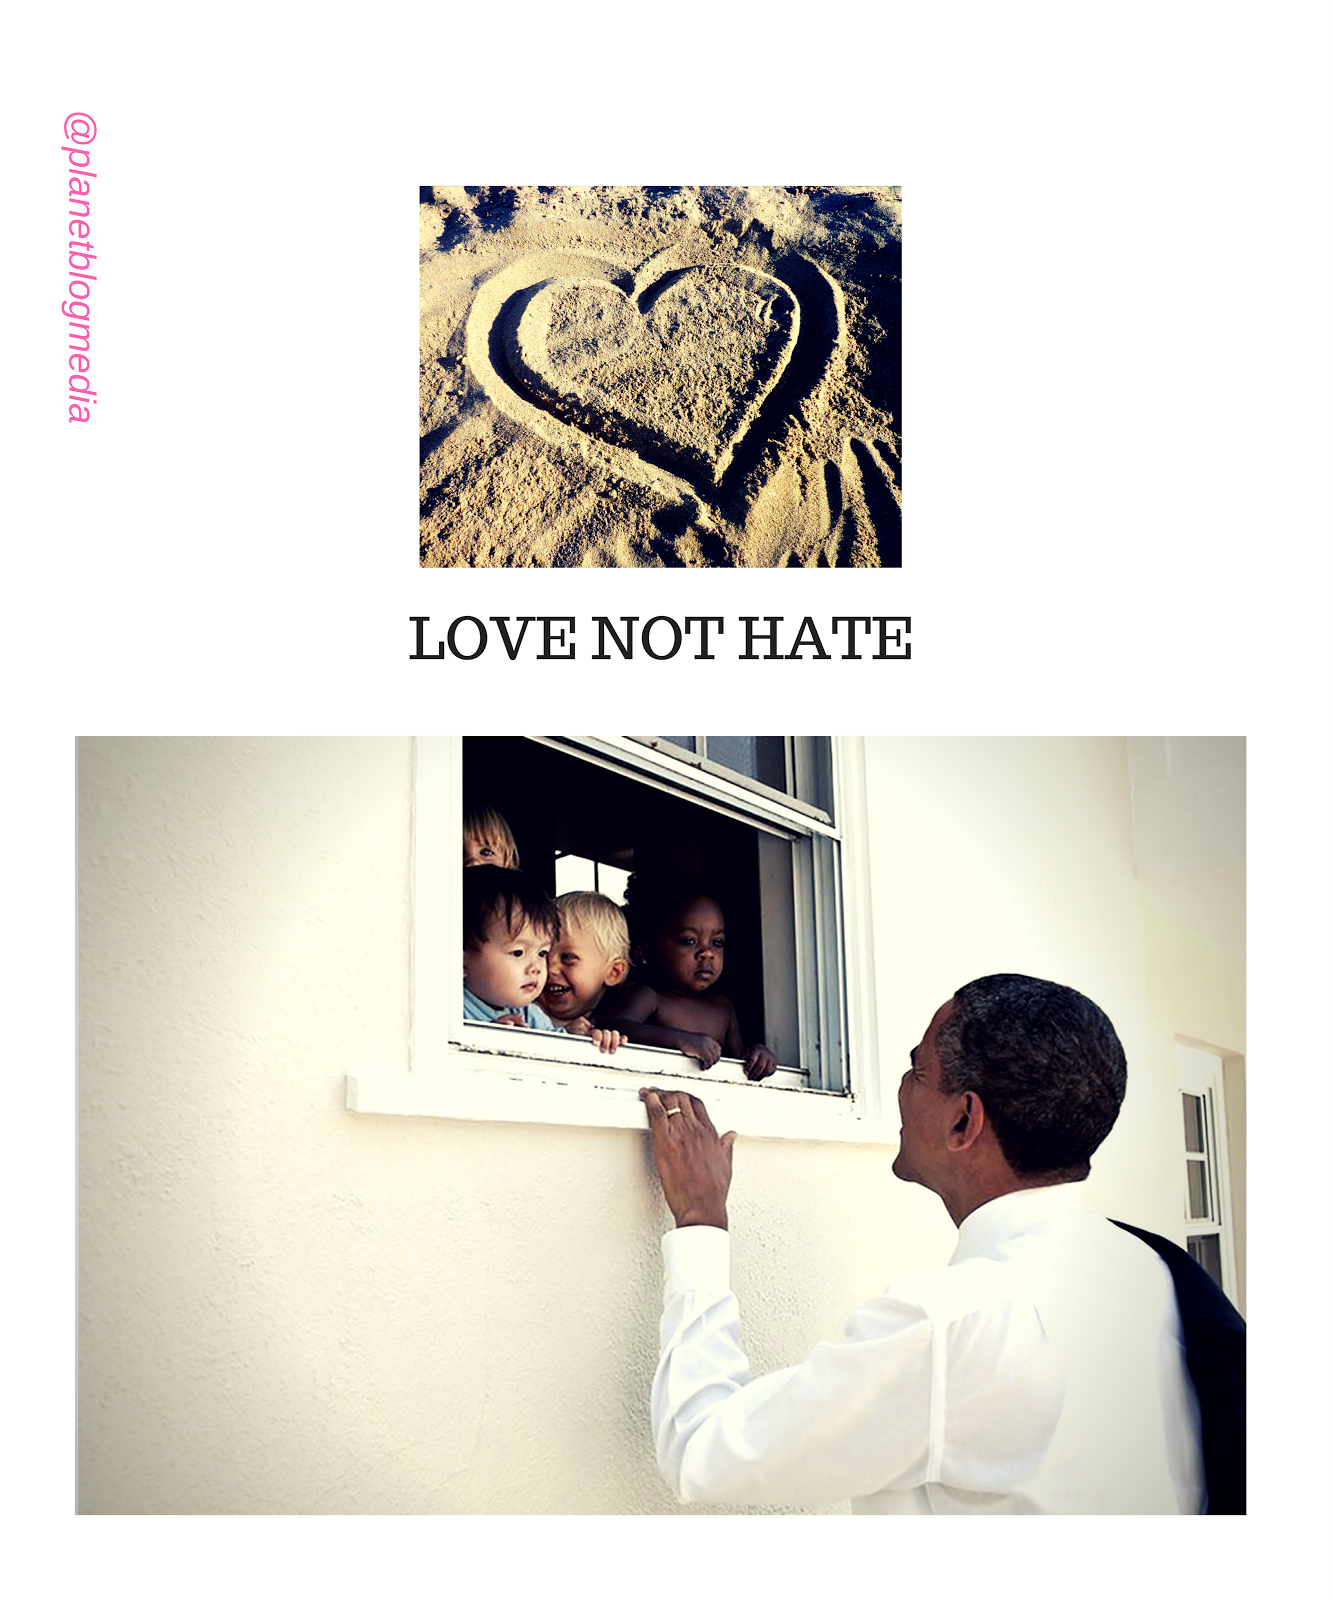 LOVE NOT HATE